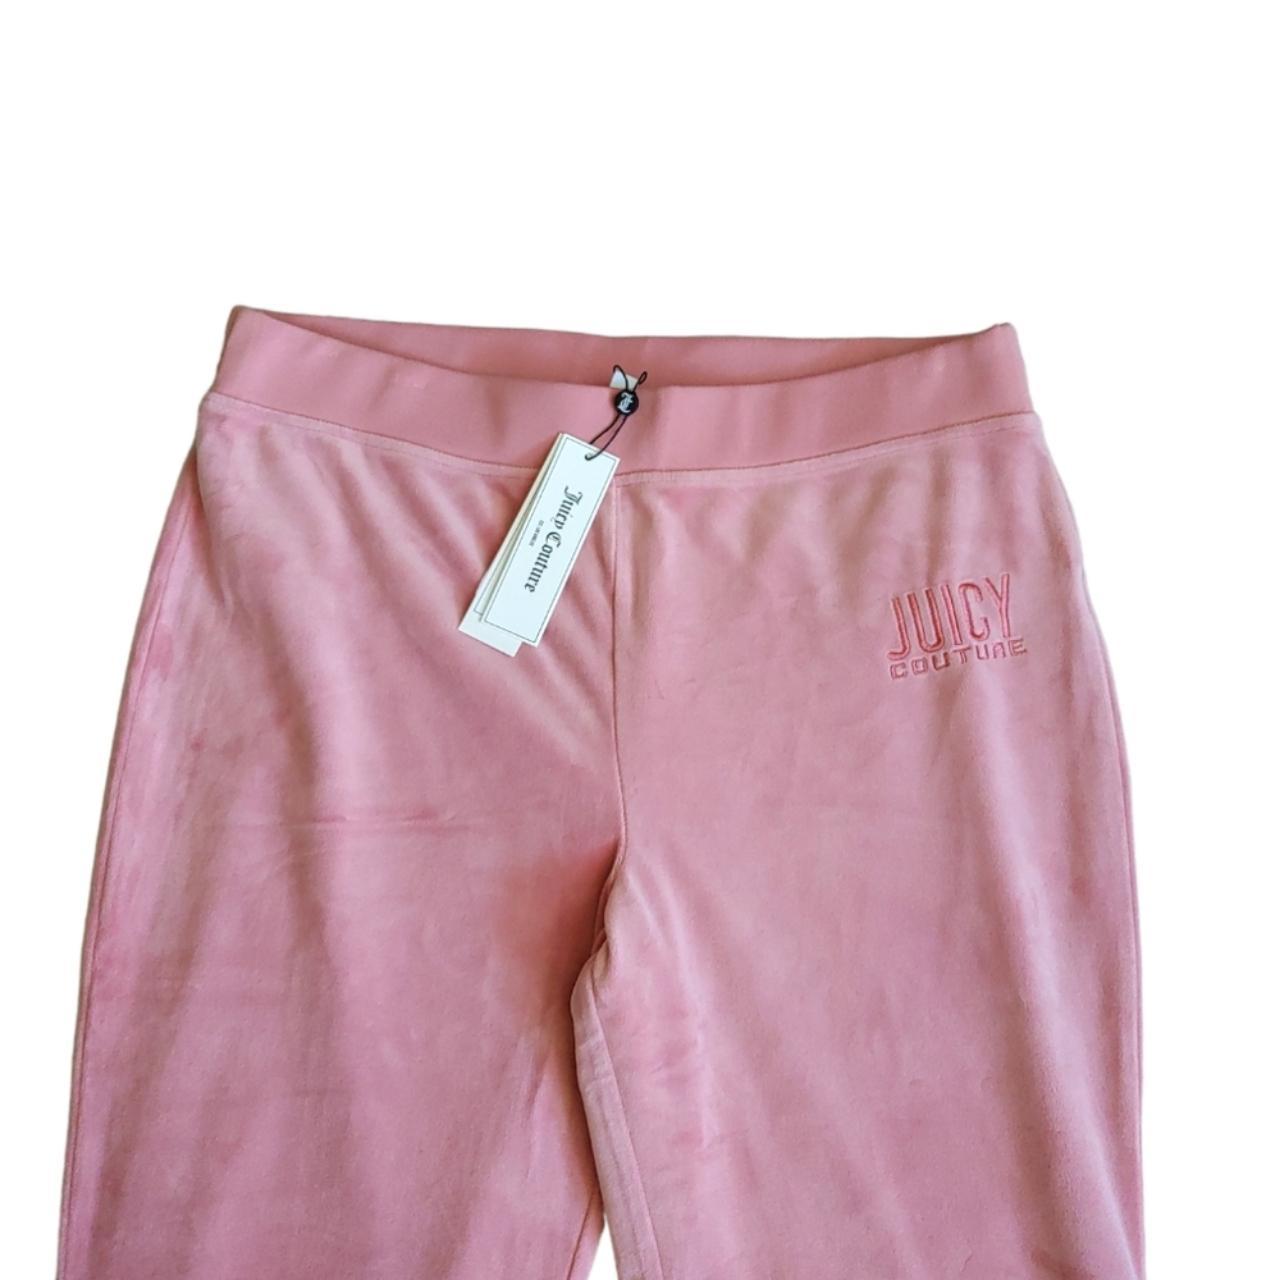 Product Image 3 - New Juicy Couture Pink Embroidered